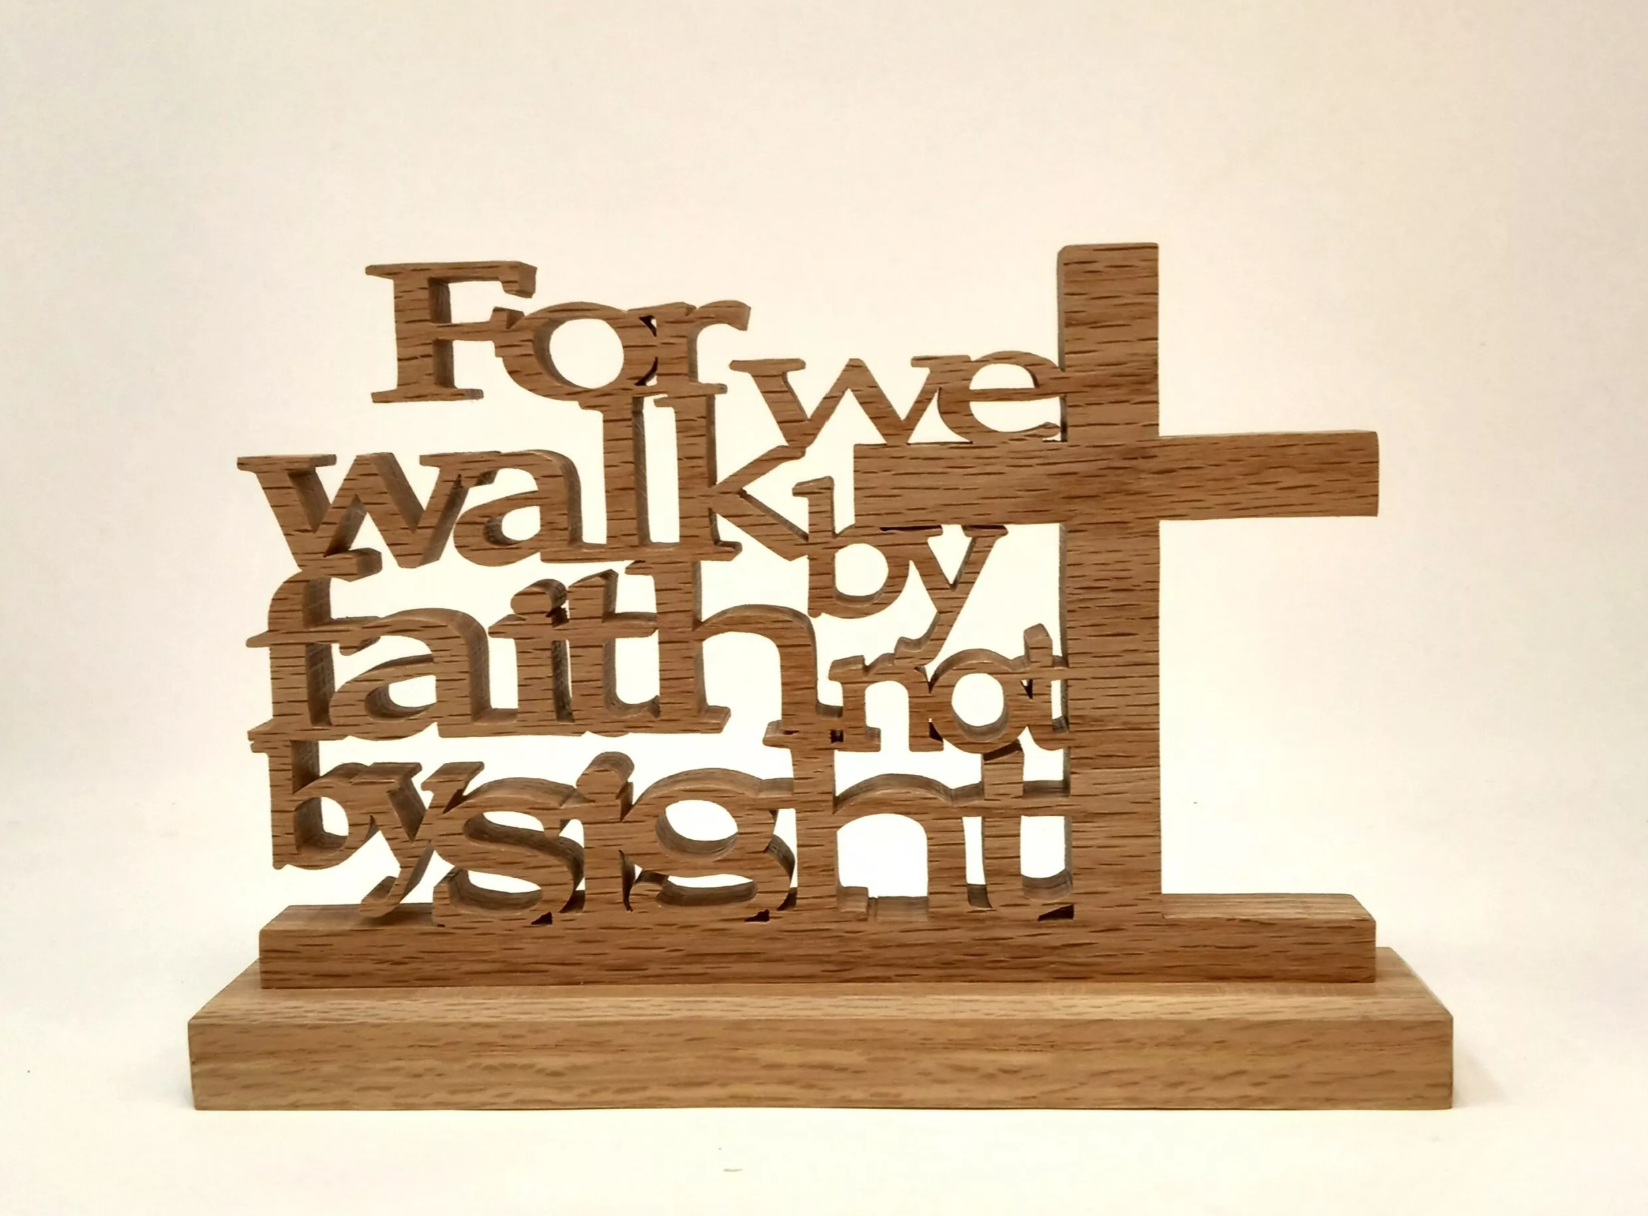 We Walk by Faith not by Sight Scripture based desk sign